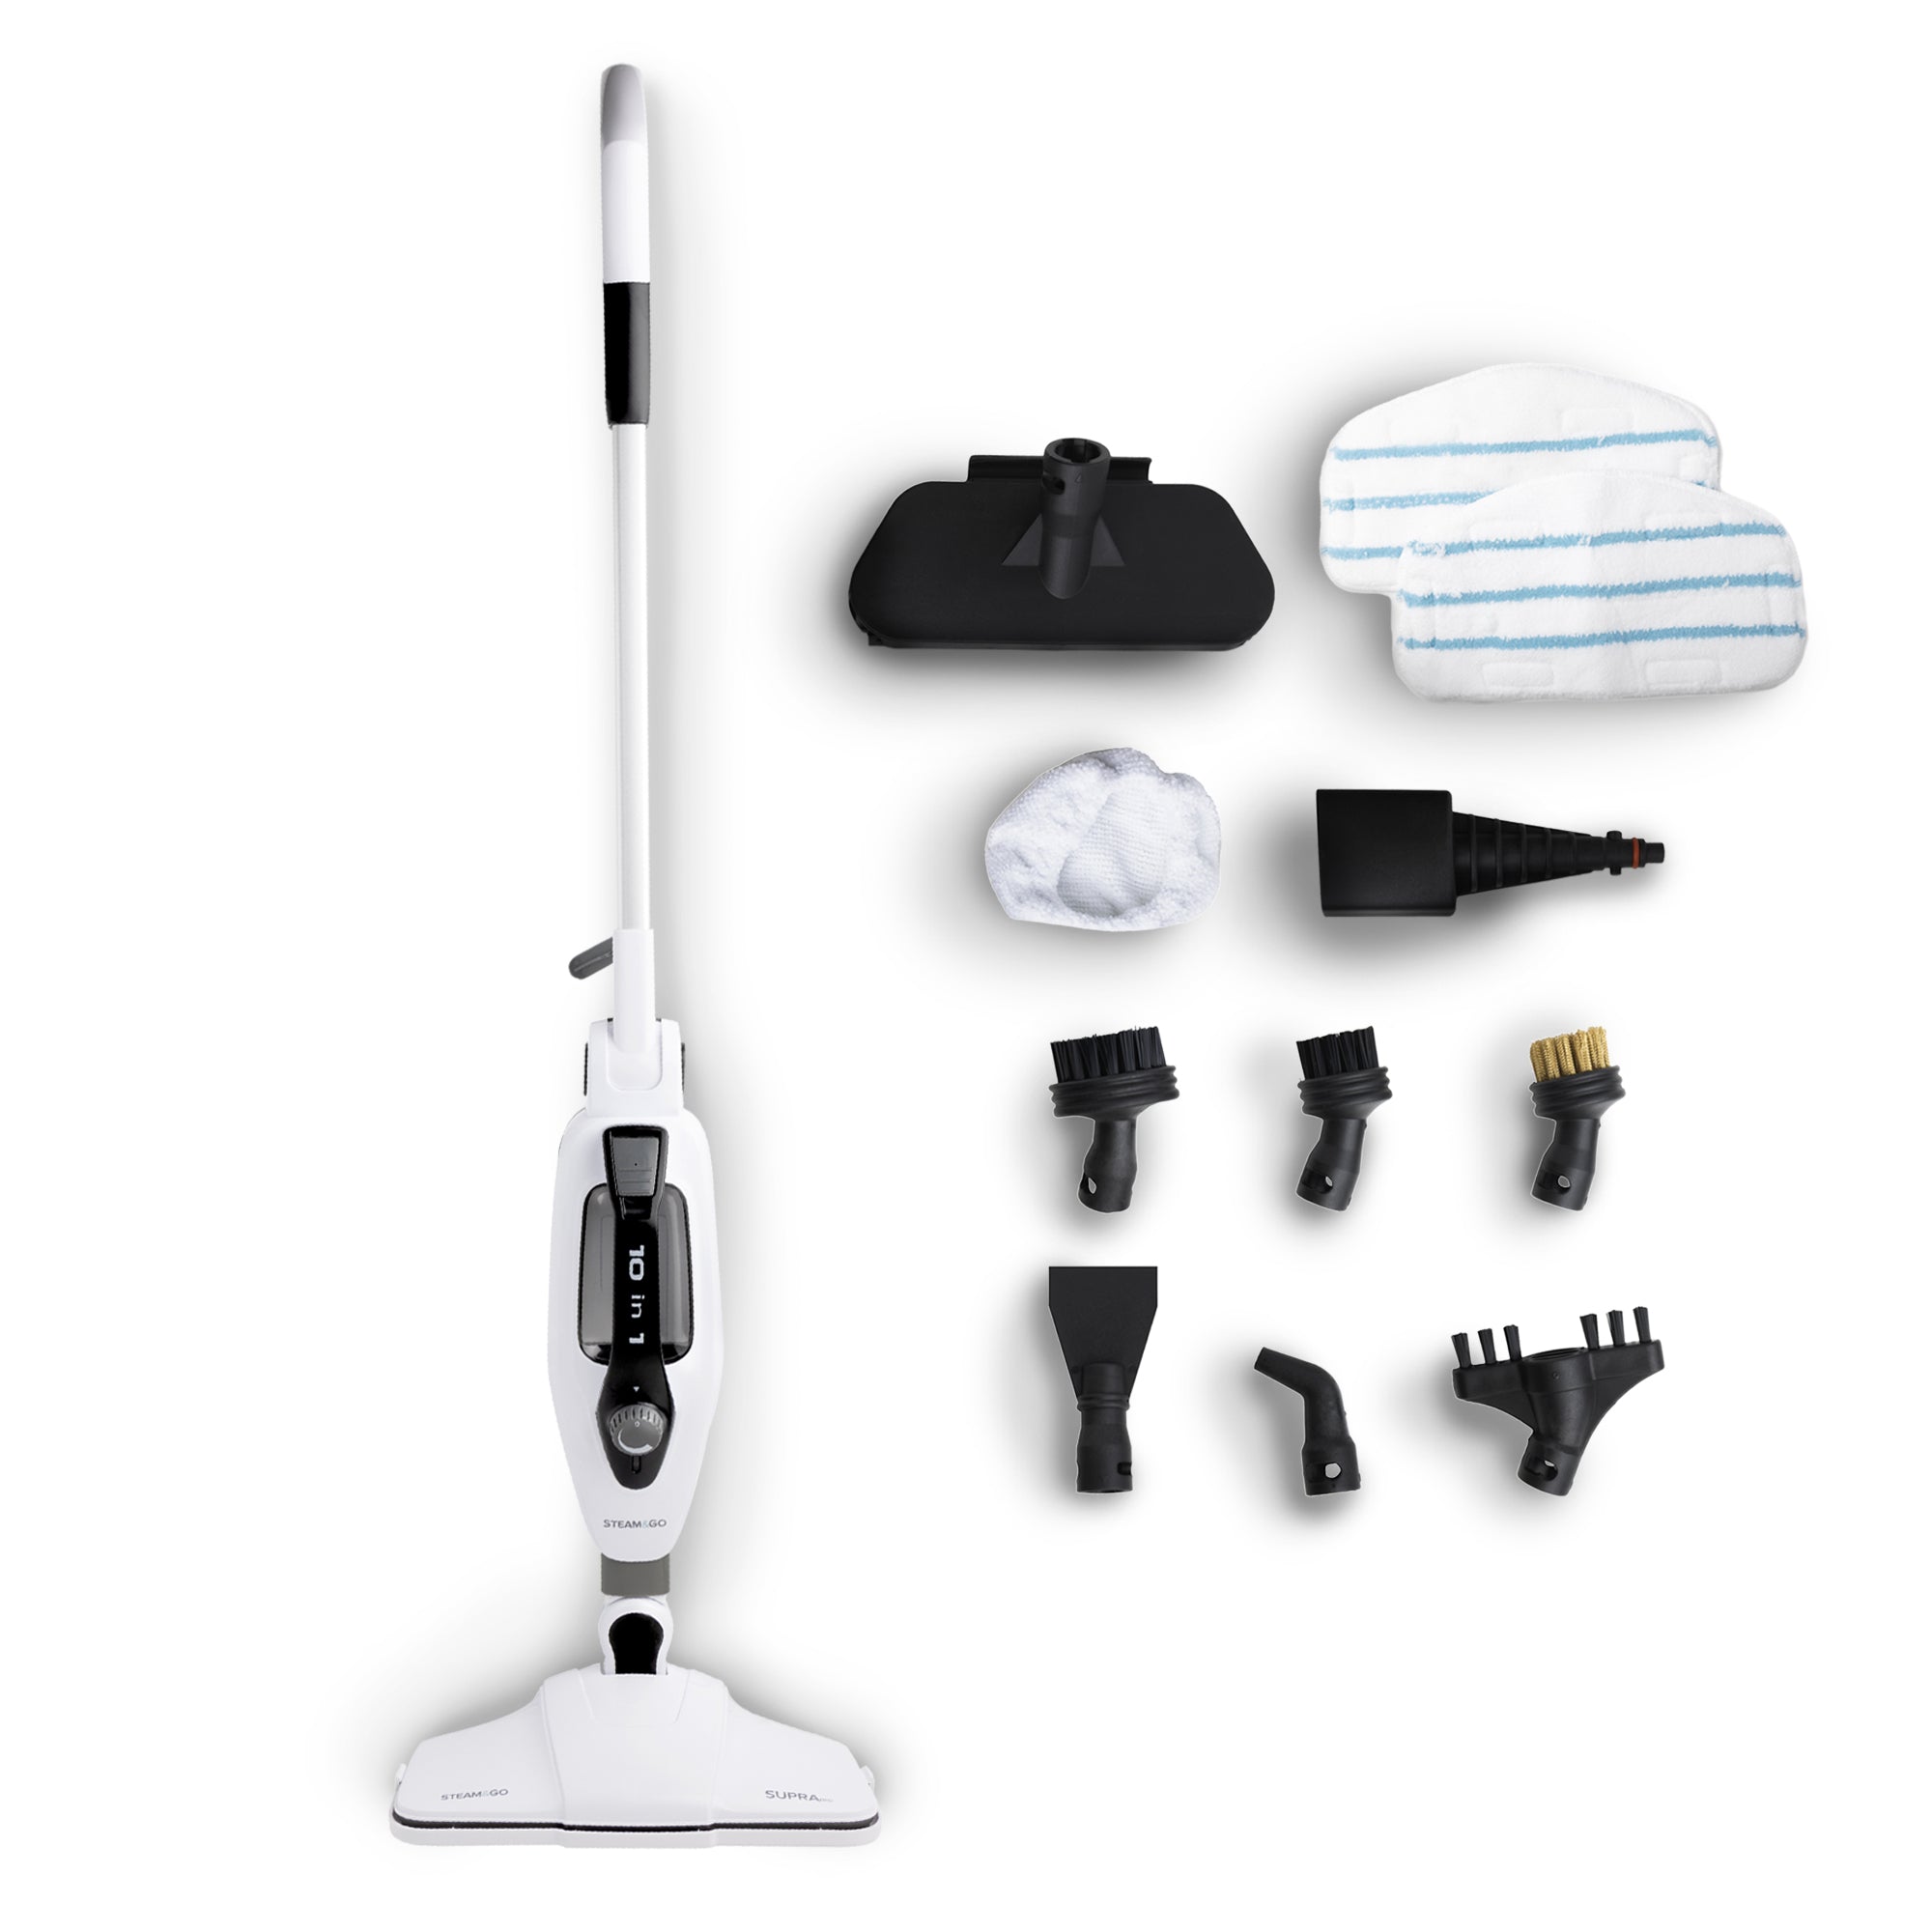 BLACK+DECKER Steam Cleaning Multipurpose System with 6 Attachments 